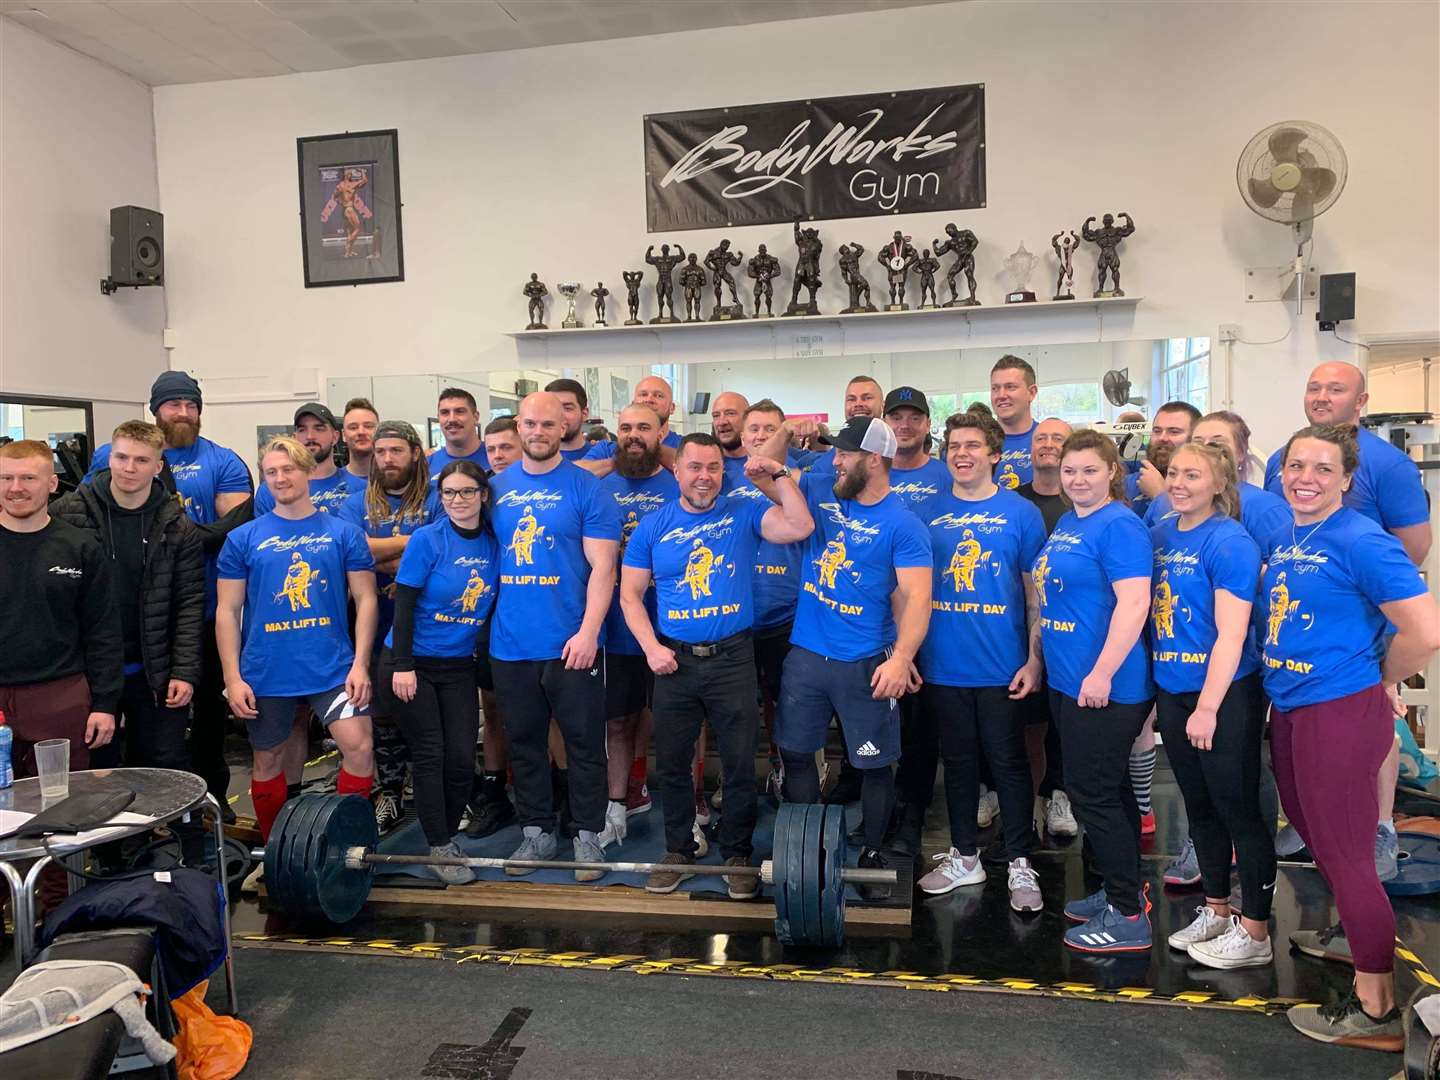 Bodyworks gym in Deal hosted a powerlifting competition (23543752)